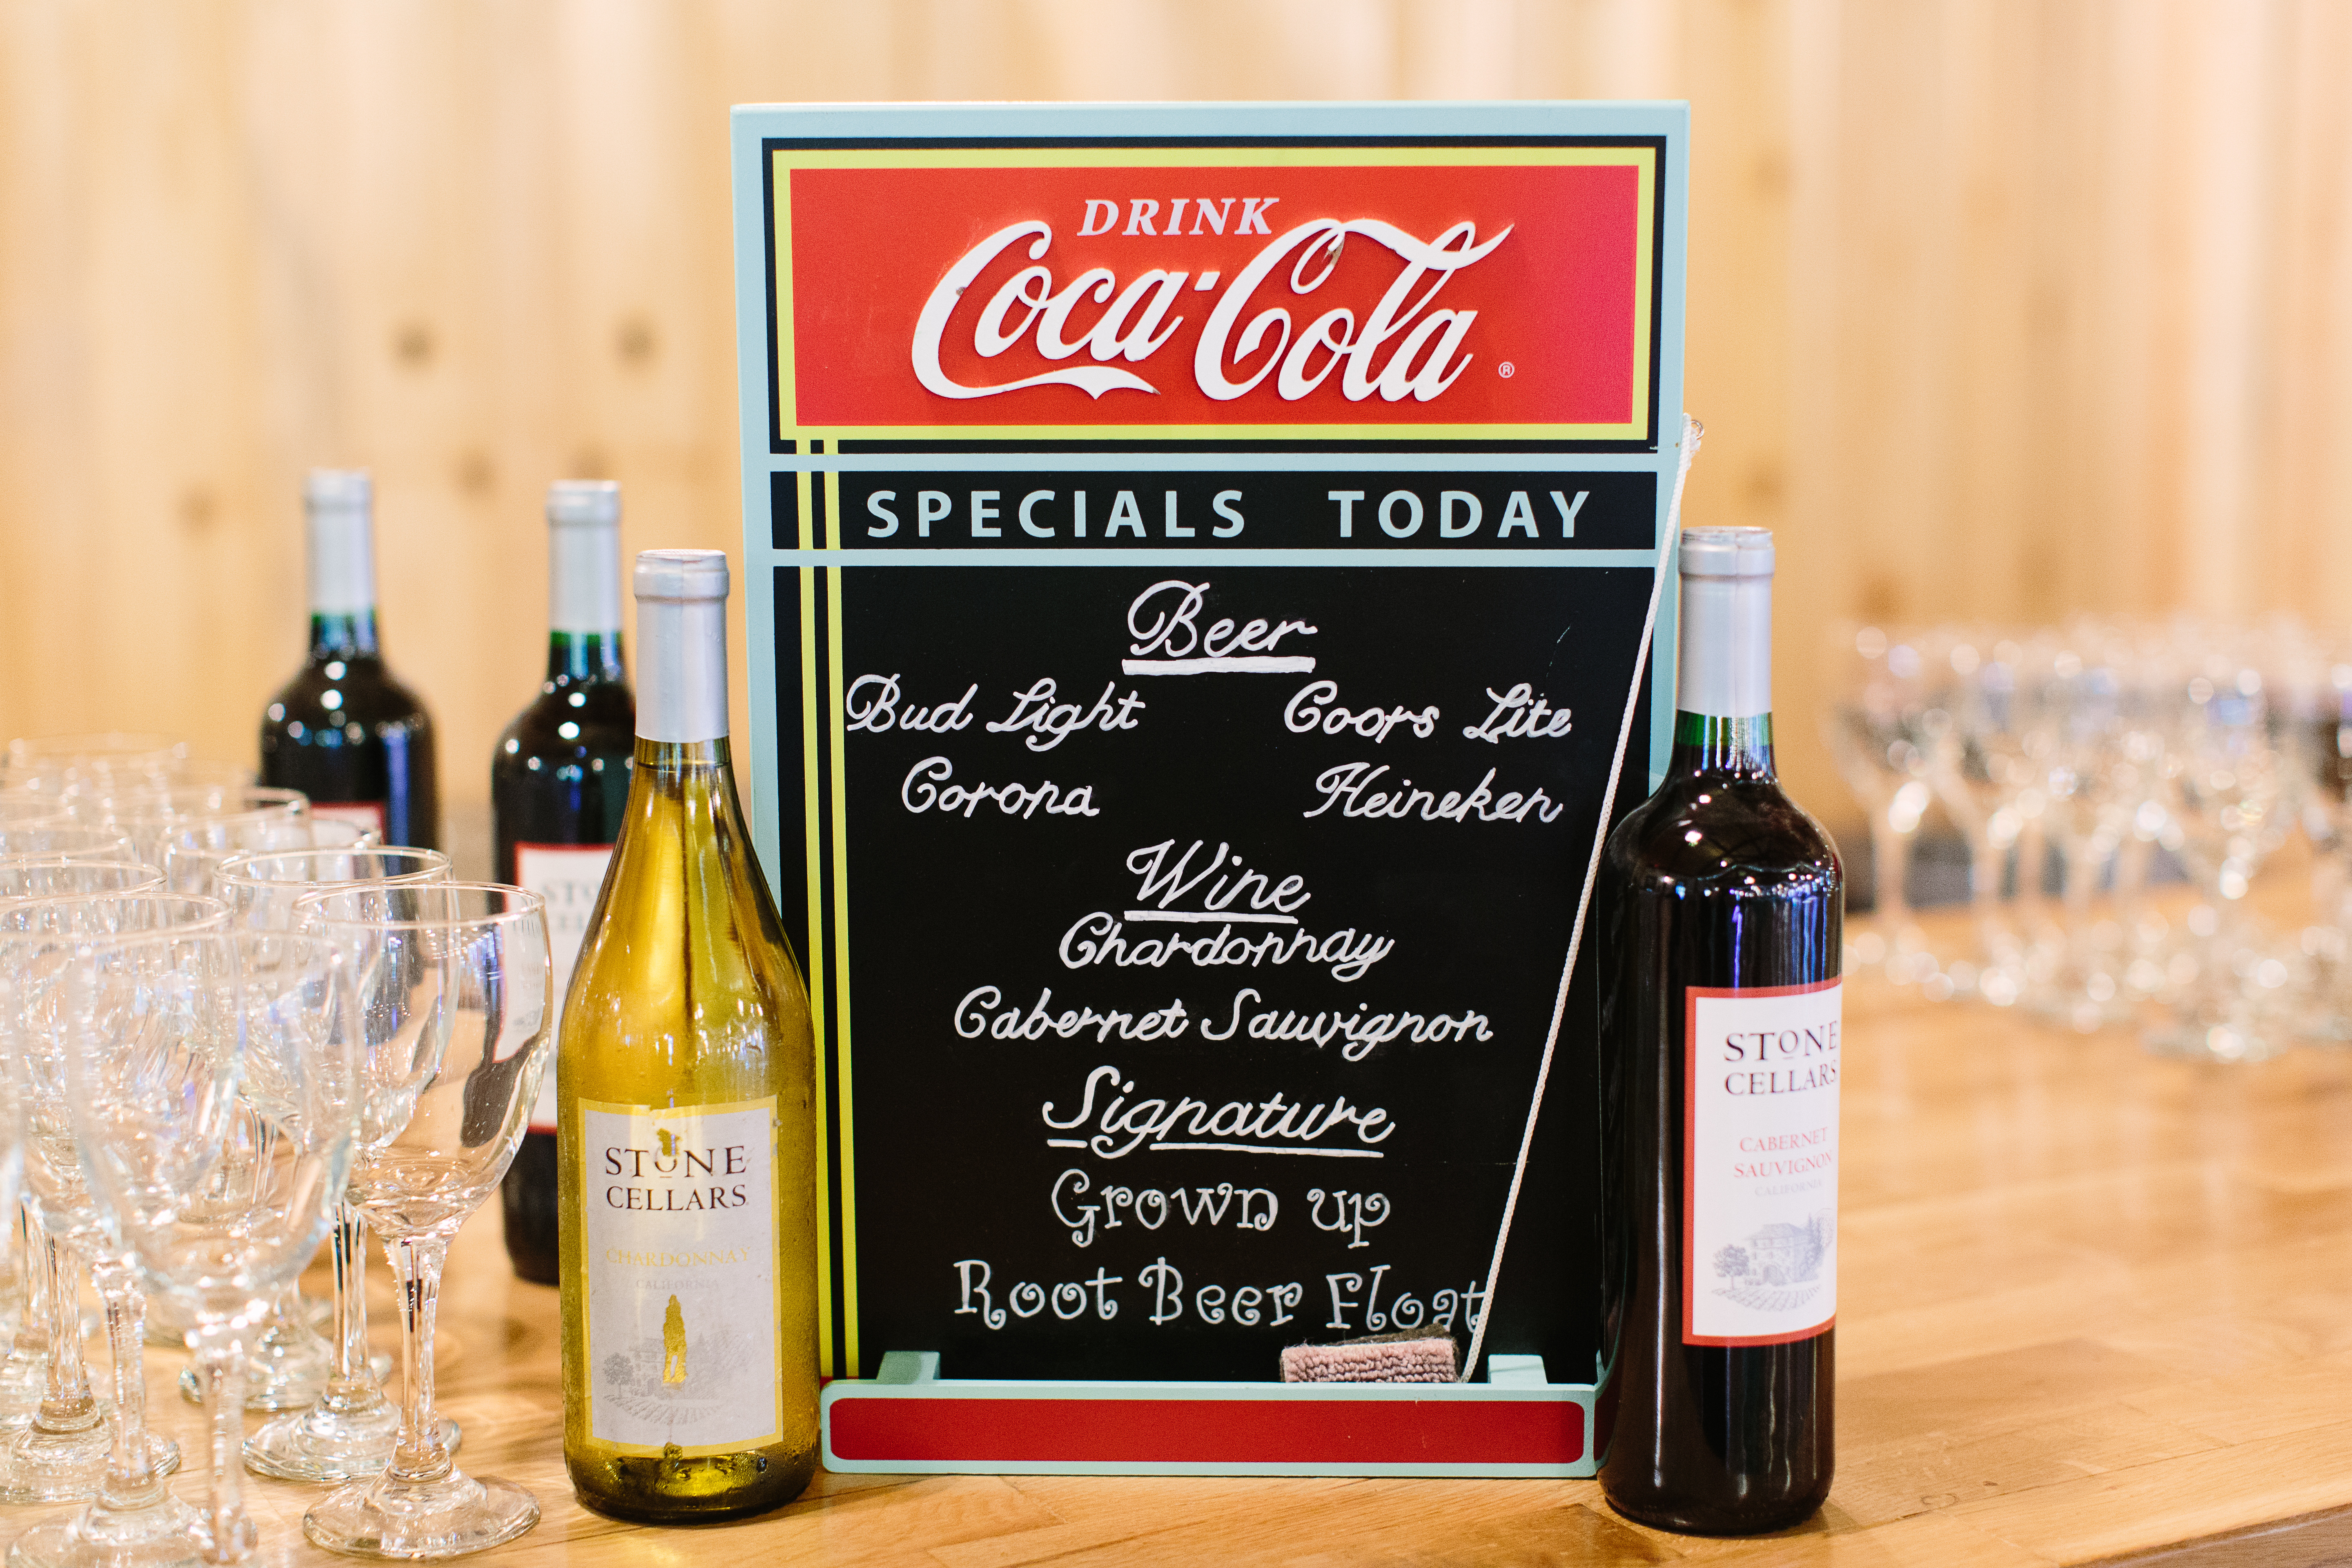 Bottles of wine, wine glasses, and a chalkboard menu on a wooden bar counter